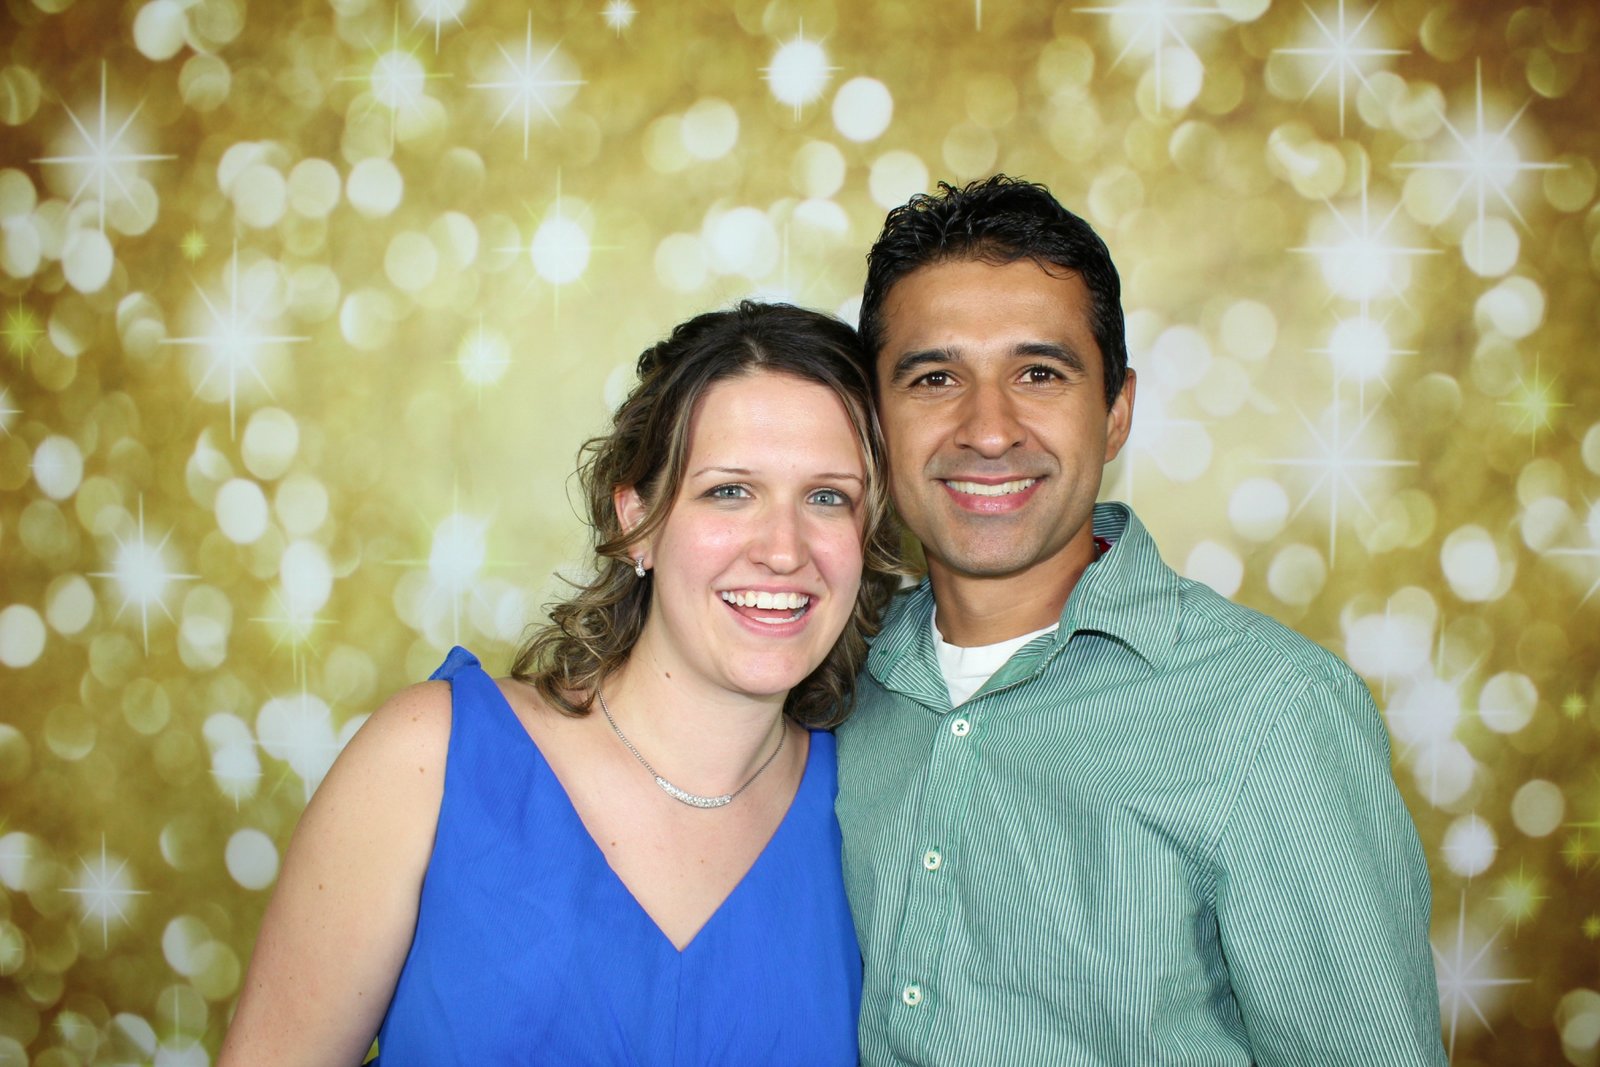 Anna & Lucas: "Our faith in Christ really solidified our relationship."